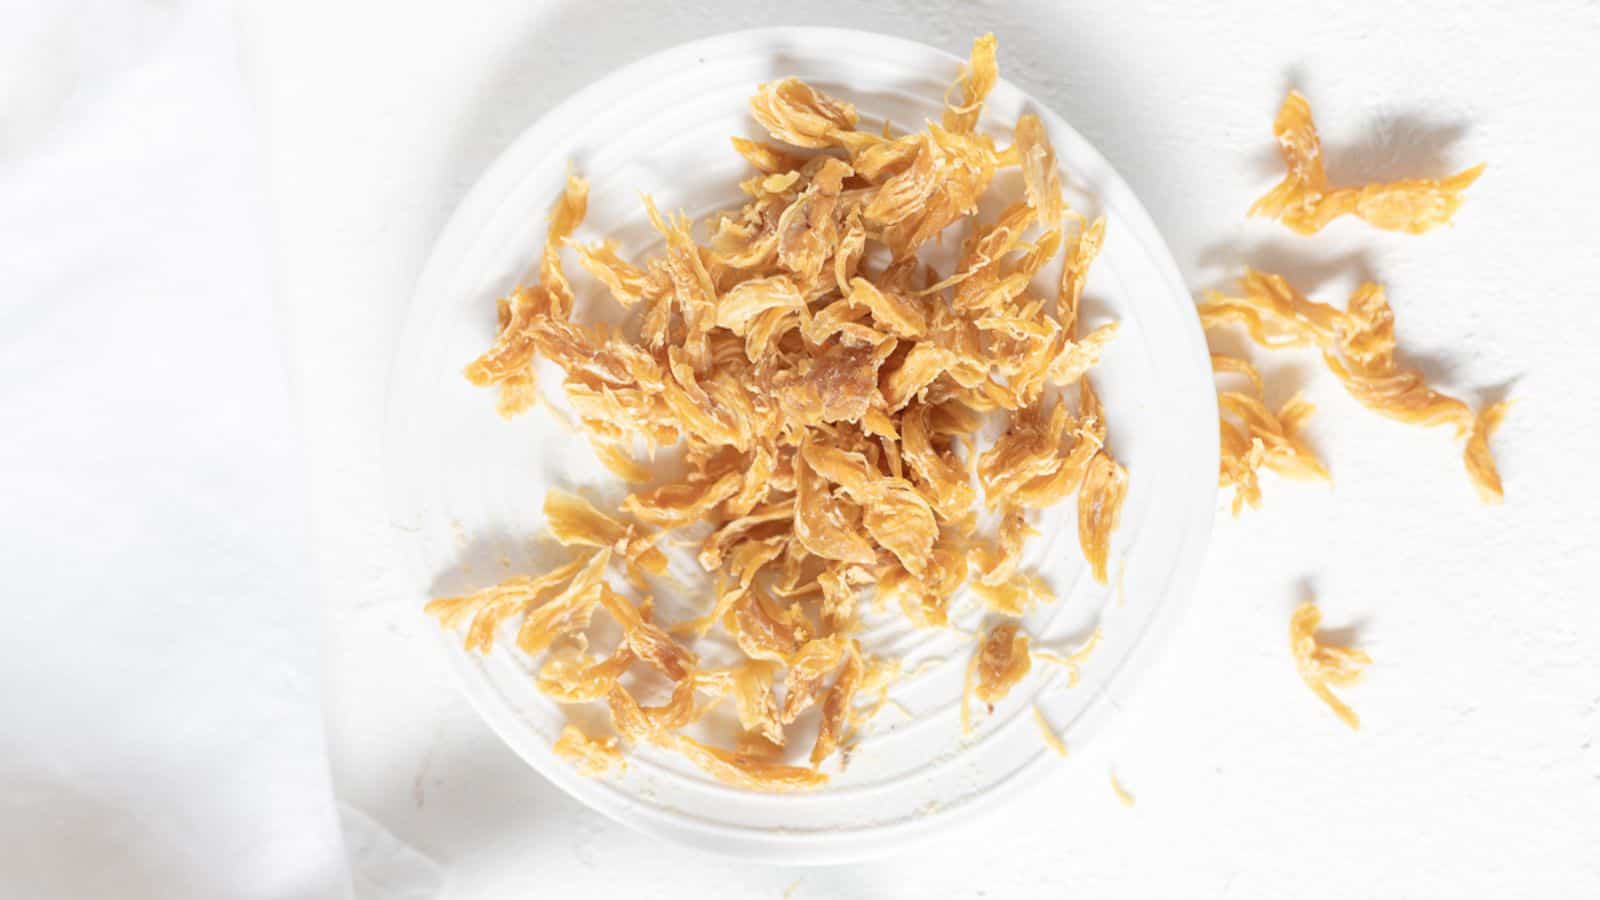 <p>Seeking a protein-packed snack for your low-carb journey? Look no further than Homemade Dehydrated Chicken – a flavorful and convenient option. These bite-sized treats offer a delicious way to stay on track with your low-carb lifestyle while enjoying the savory goodness of homemade dehydrated chicken. Snack smart, snack deliciously, and keep your low-carb goals in check with every bite.<br><strong>Get the Recipe: </strong><a href="https://www.lowcarb-nocarb.com/dehydrated-chicken/?utm_source=msn&utm_medium=page&utm_campaign=msn">Homemade Dehydrated Chicken</a></p>